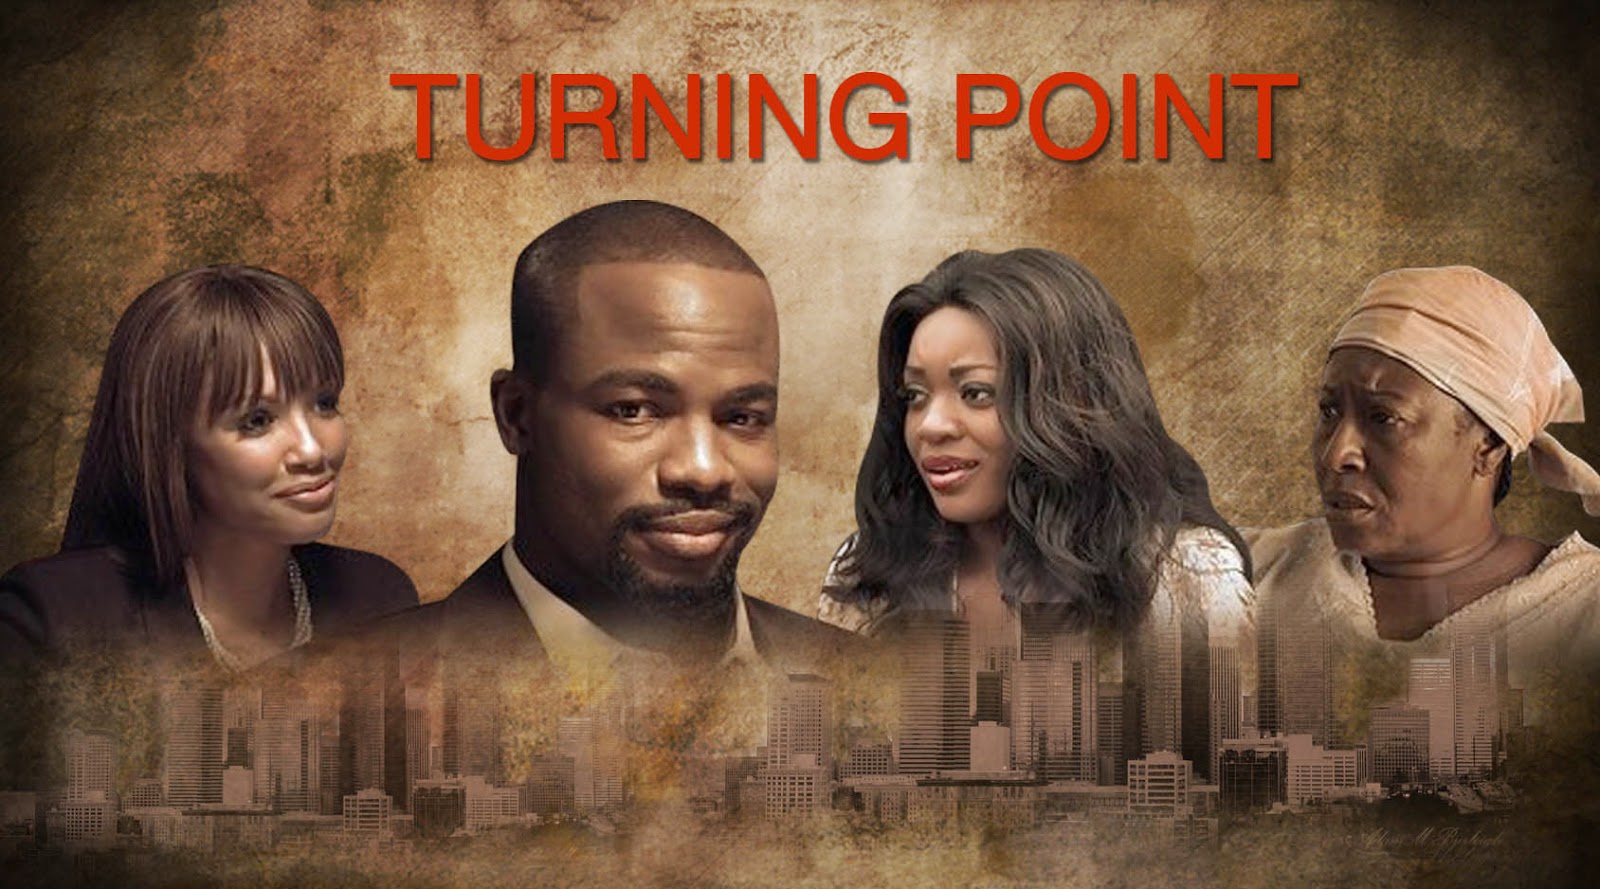 The Nollywood-Hollywood collaboration Movie 'TURNING POINT' is now showing on iROKOtv ...1600 x 889